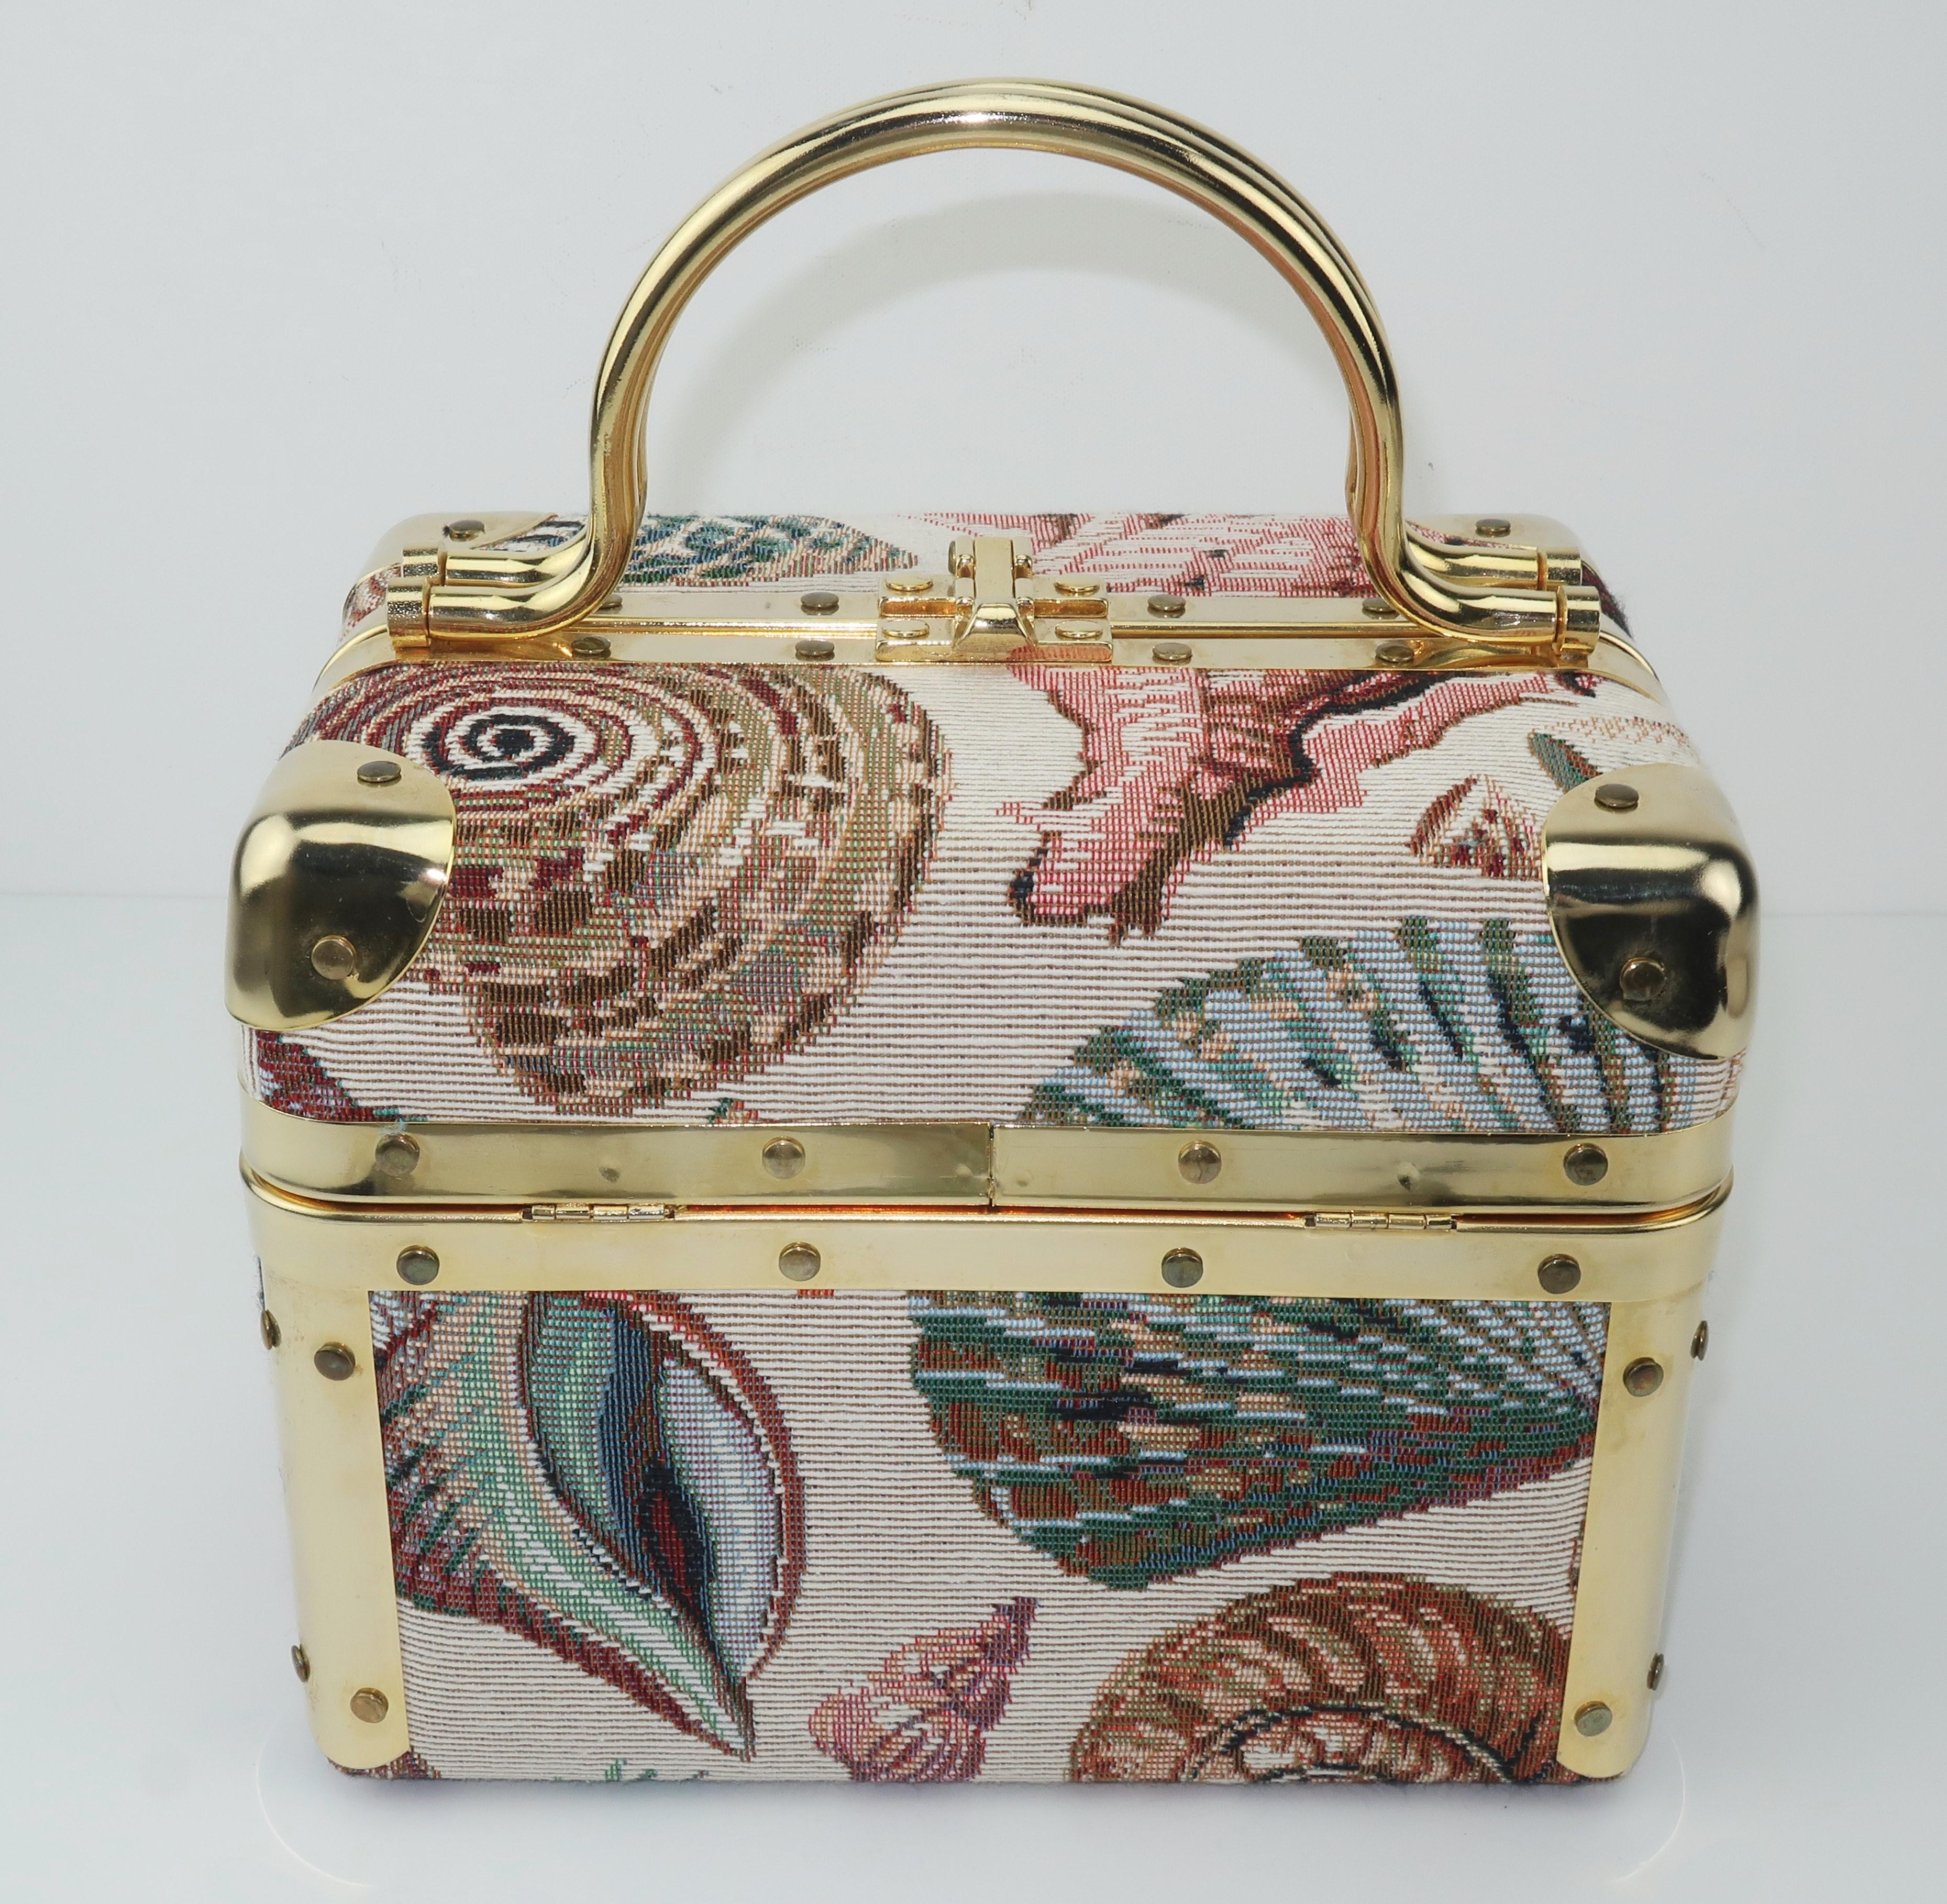 Fun and functional Lisette of New York train case style handbag with a gold tone metal frame and a seashell motif tapestry fabric.  The swivel handles part to reveal a hammer style clip closure.  Both sides of the top are hinged and open to a faille